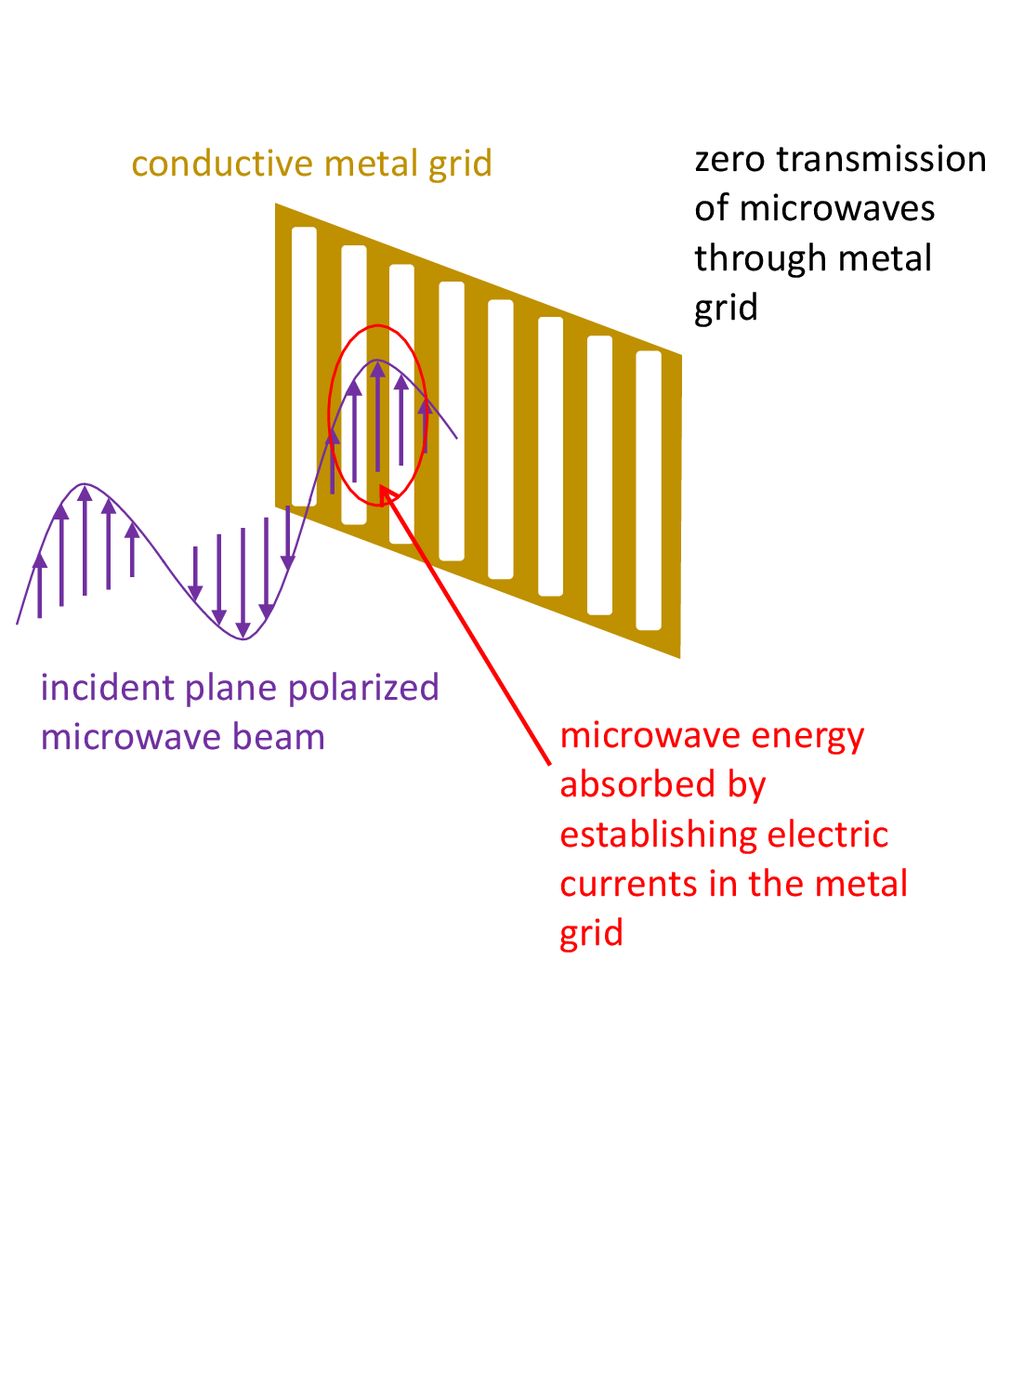 conductive metal grid zero transmission of microwaves through metal grid. incident plane polarized microwave beam.